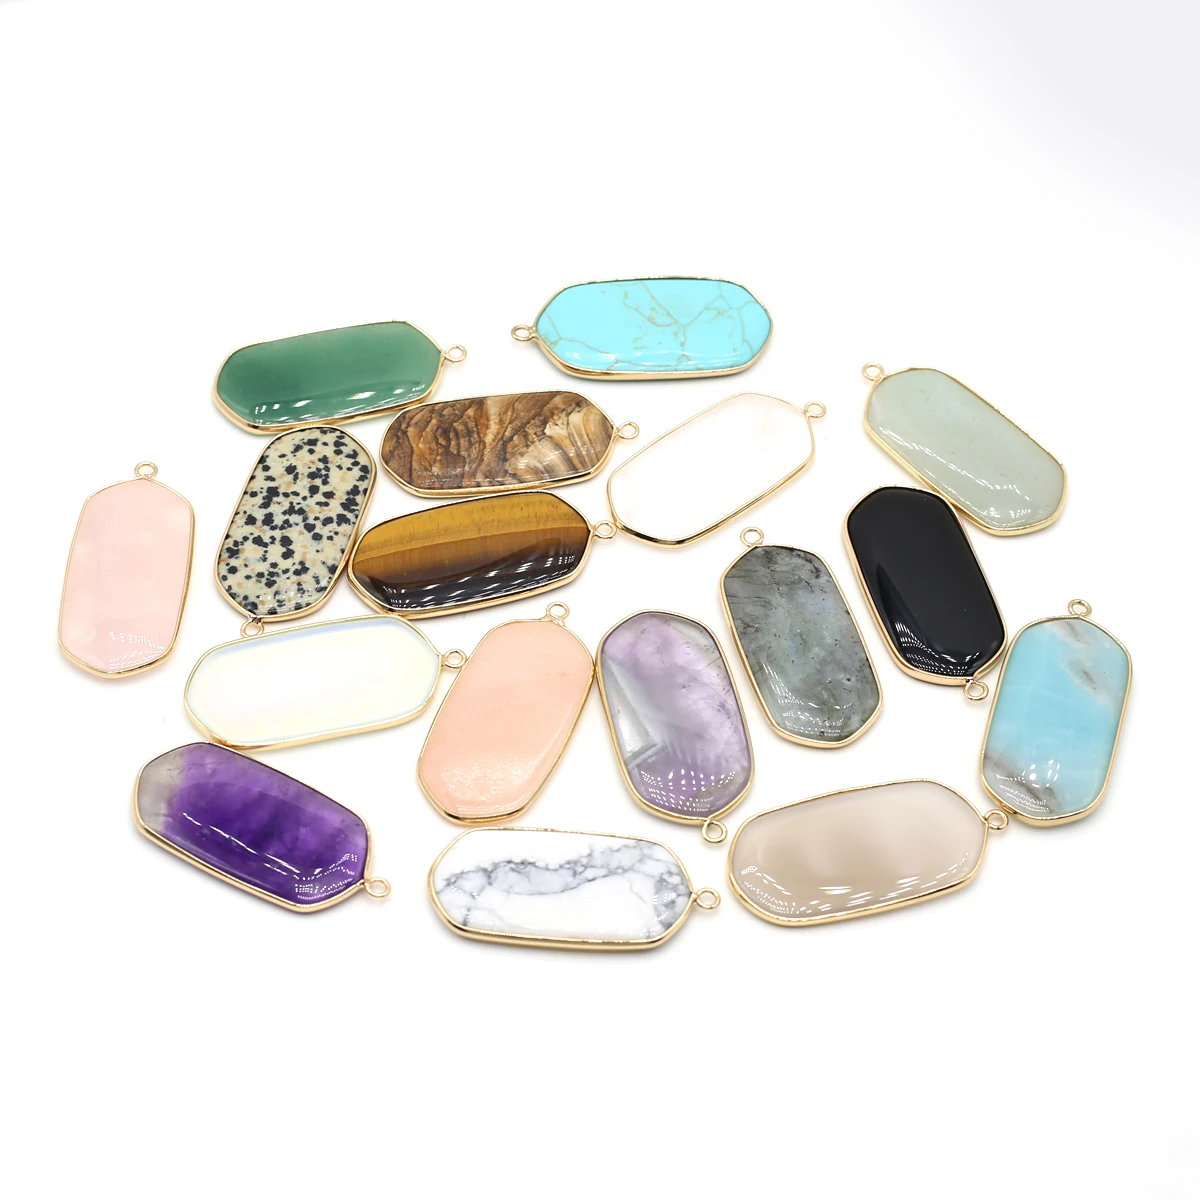 

Natural Flash Stone Pendant Oval Amethyst Crystal Quartz Agate Tiger Eye Opal Turquoise Amazonite Charms for Jewelry Making DIY